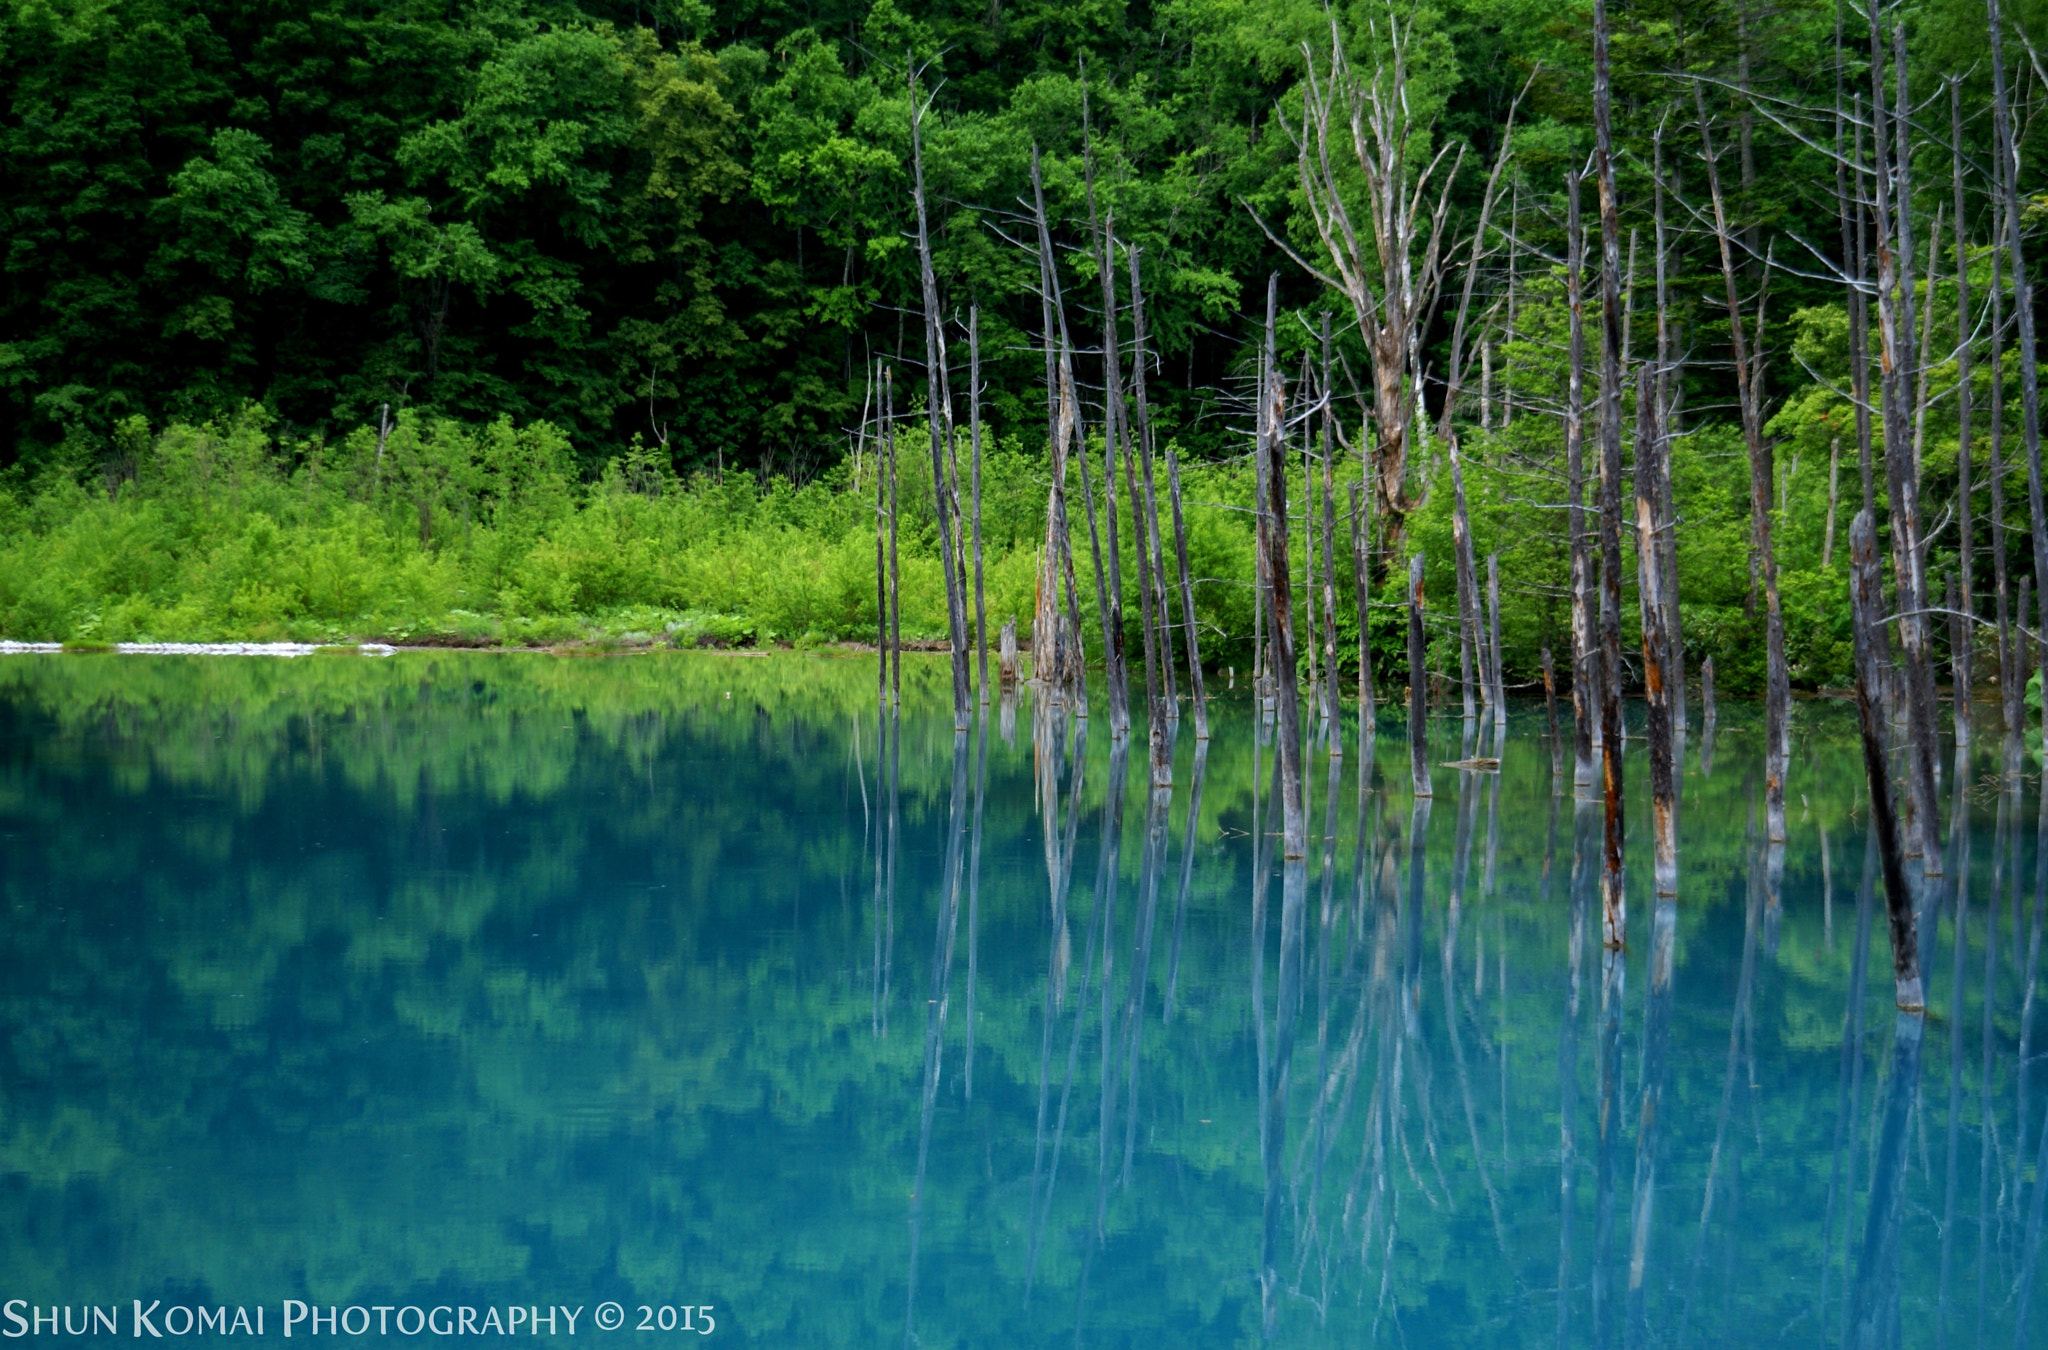 Tamron 24-135mm F3.5-5.6 sample photo. Blue pond in summer photography